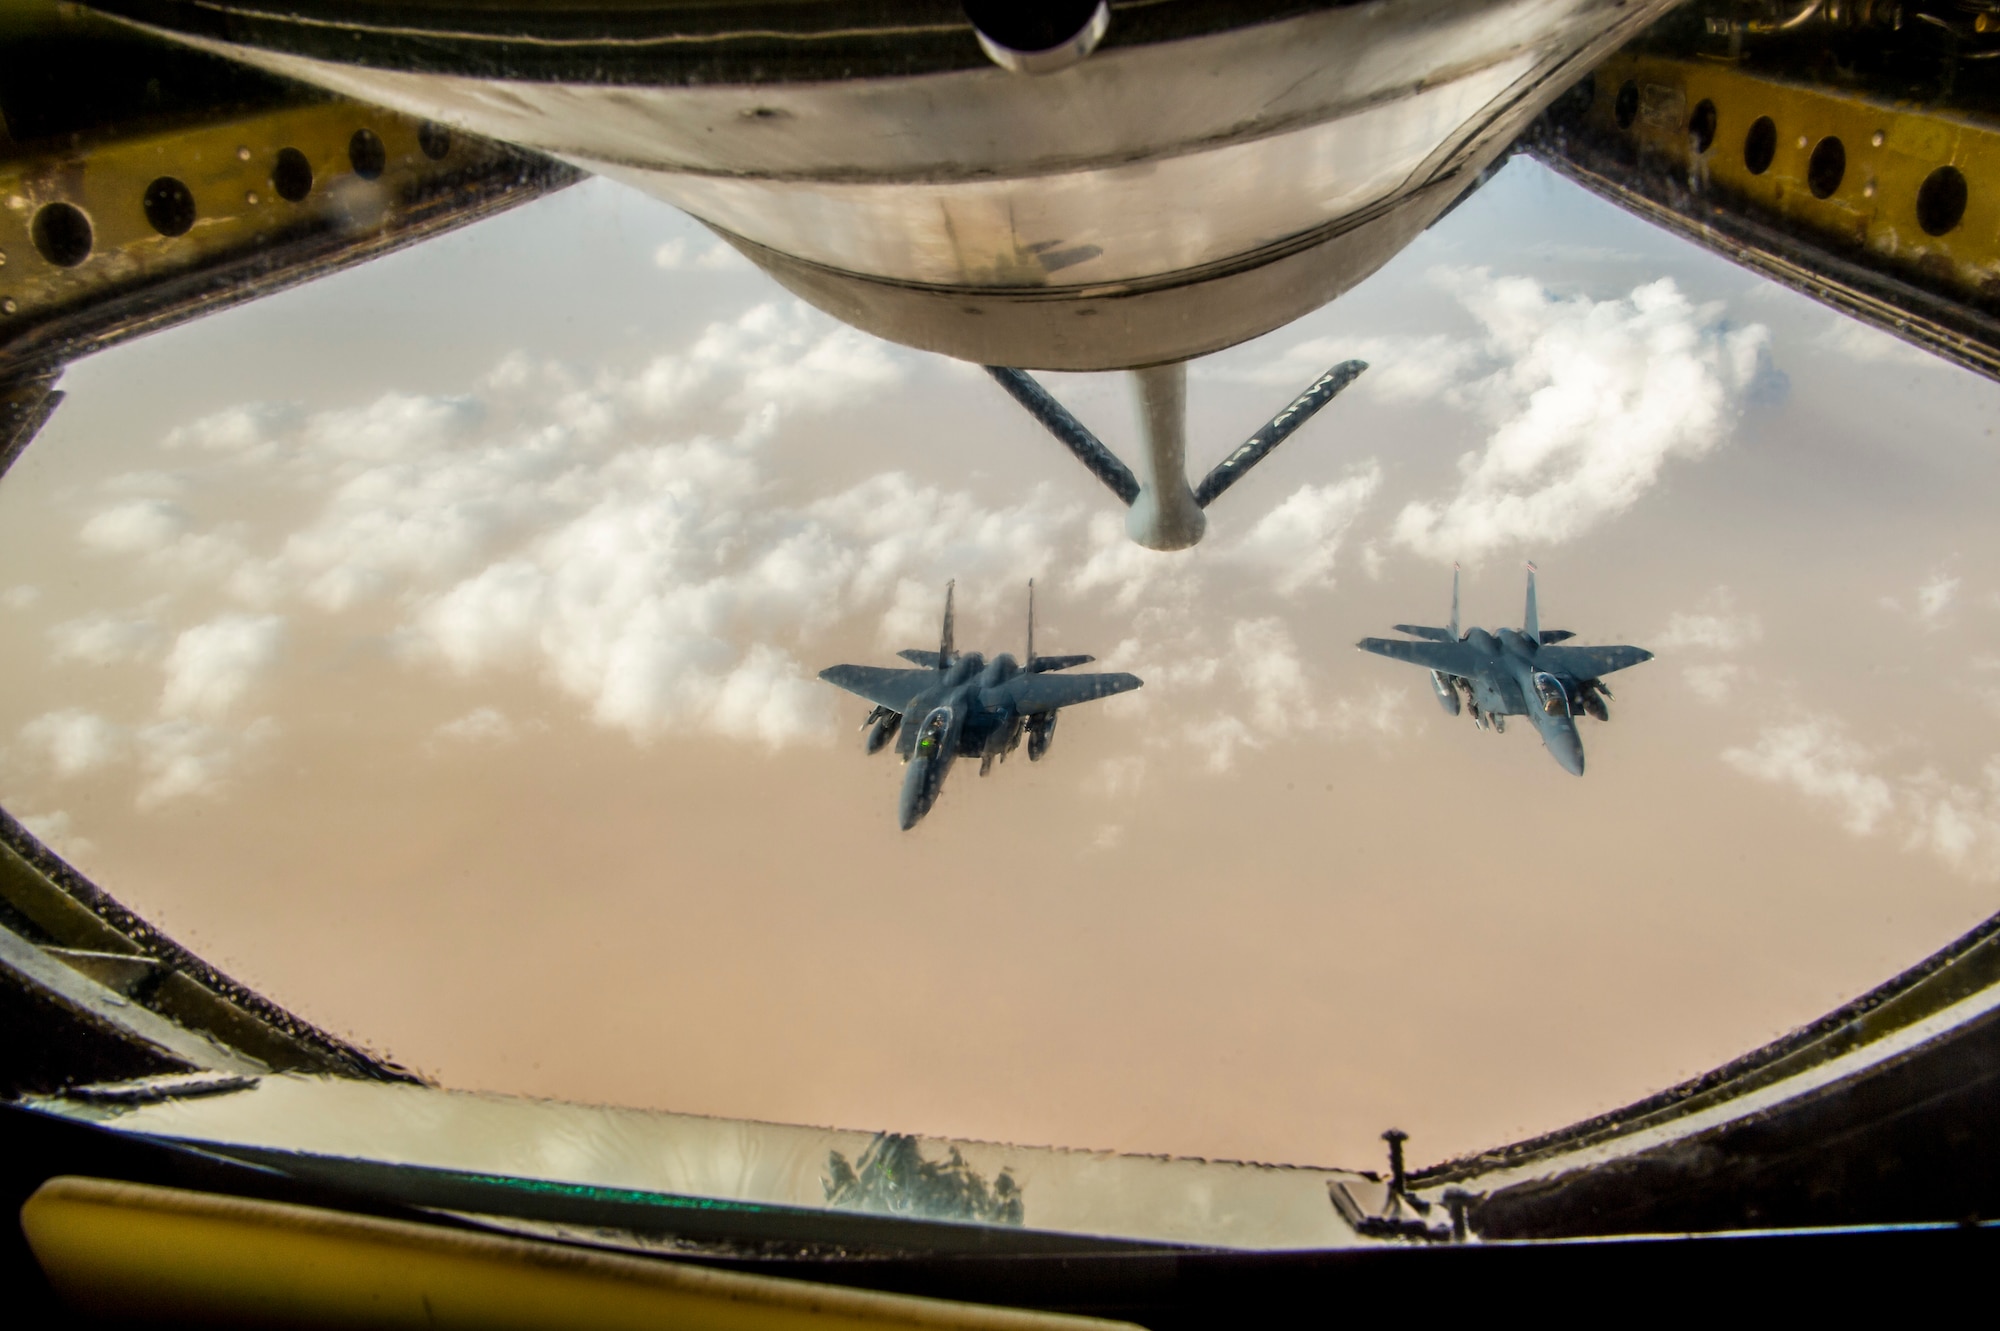 Two U.S. Air Force  F-15 Eagles fly in formation after receiving fuel from a KC-135 Stratotanker assigned to the 340th Expeditionary Air Refueling Squadron during a aerial refueling mission in support of Operation Inherent Resolve over Iraq, May 5, 2018. The 340th EARS is assigned to the 379th Expeditionary Operations Group and supports various operations in countries such as Iraq, Syria and Afghanistan